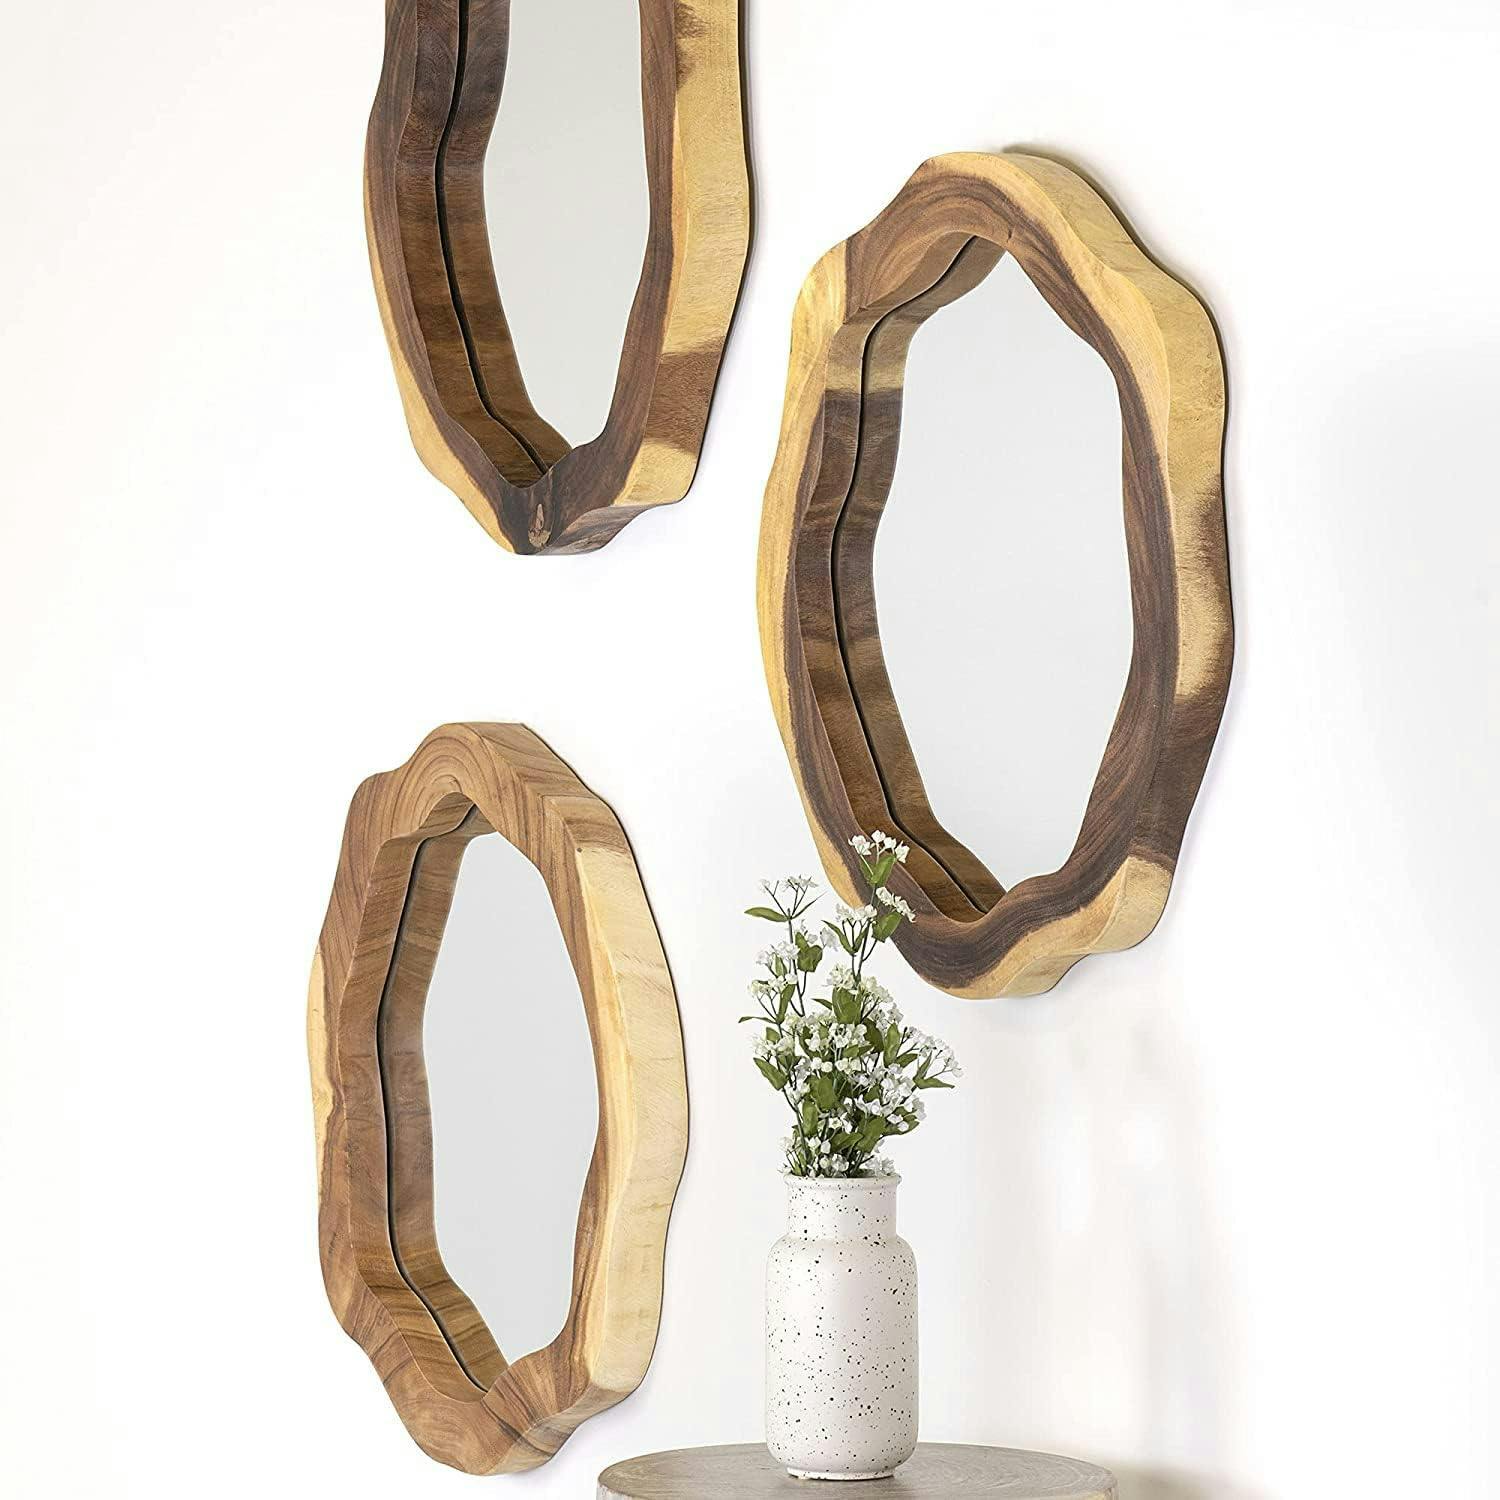 24" Round Natural Brown Solid Wood Asymmetrical Wall Mirror